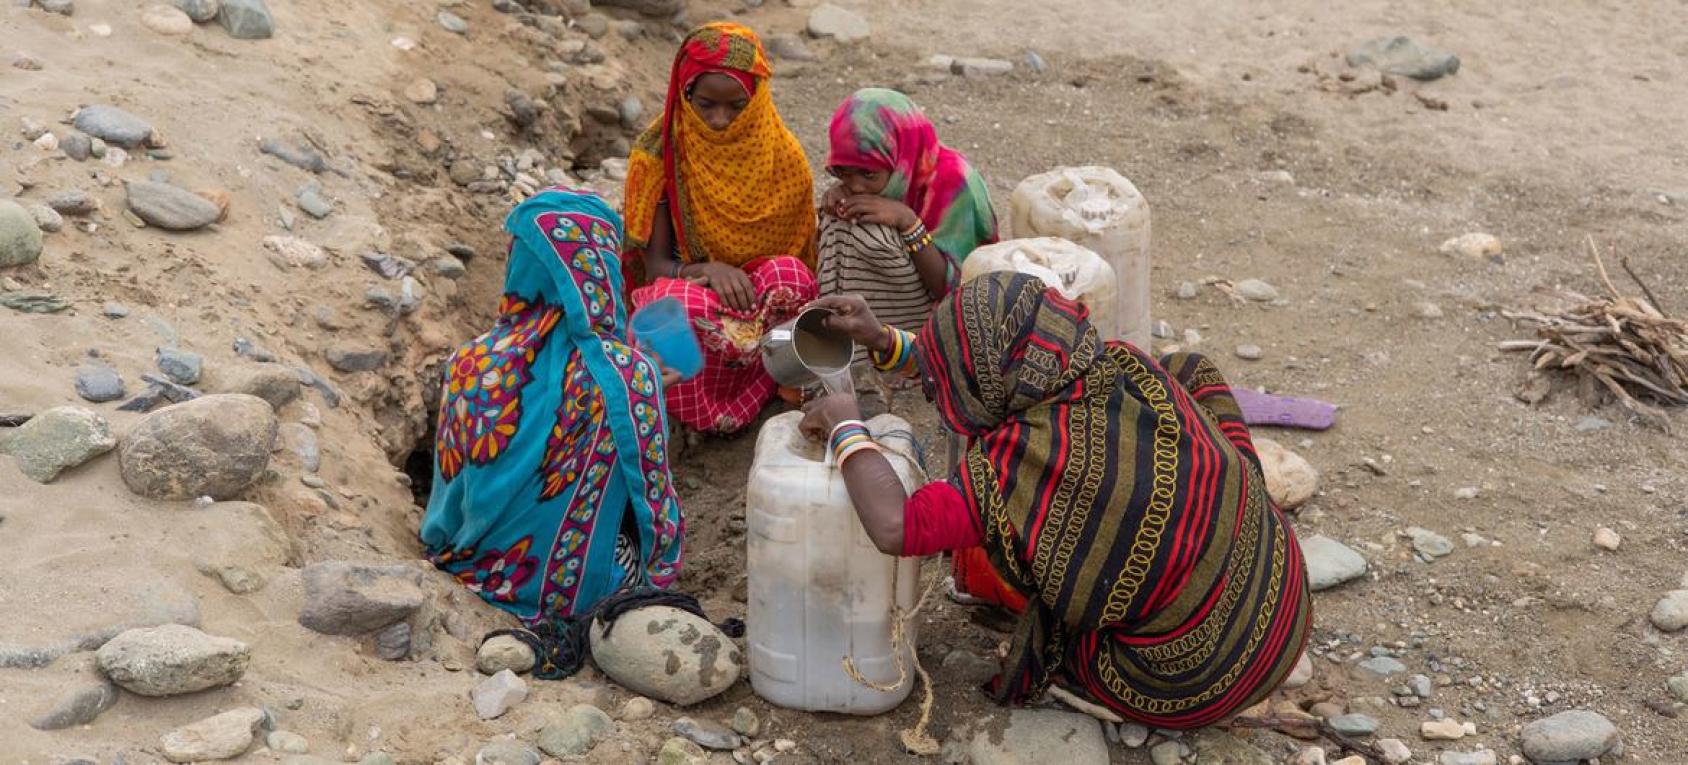 Four women are collecting water in a dry area 